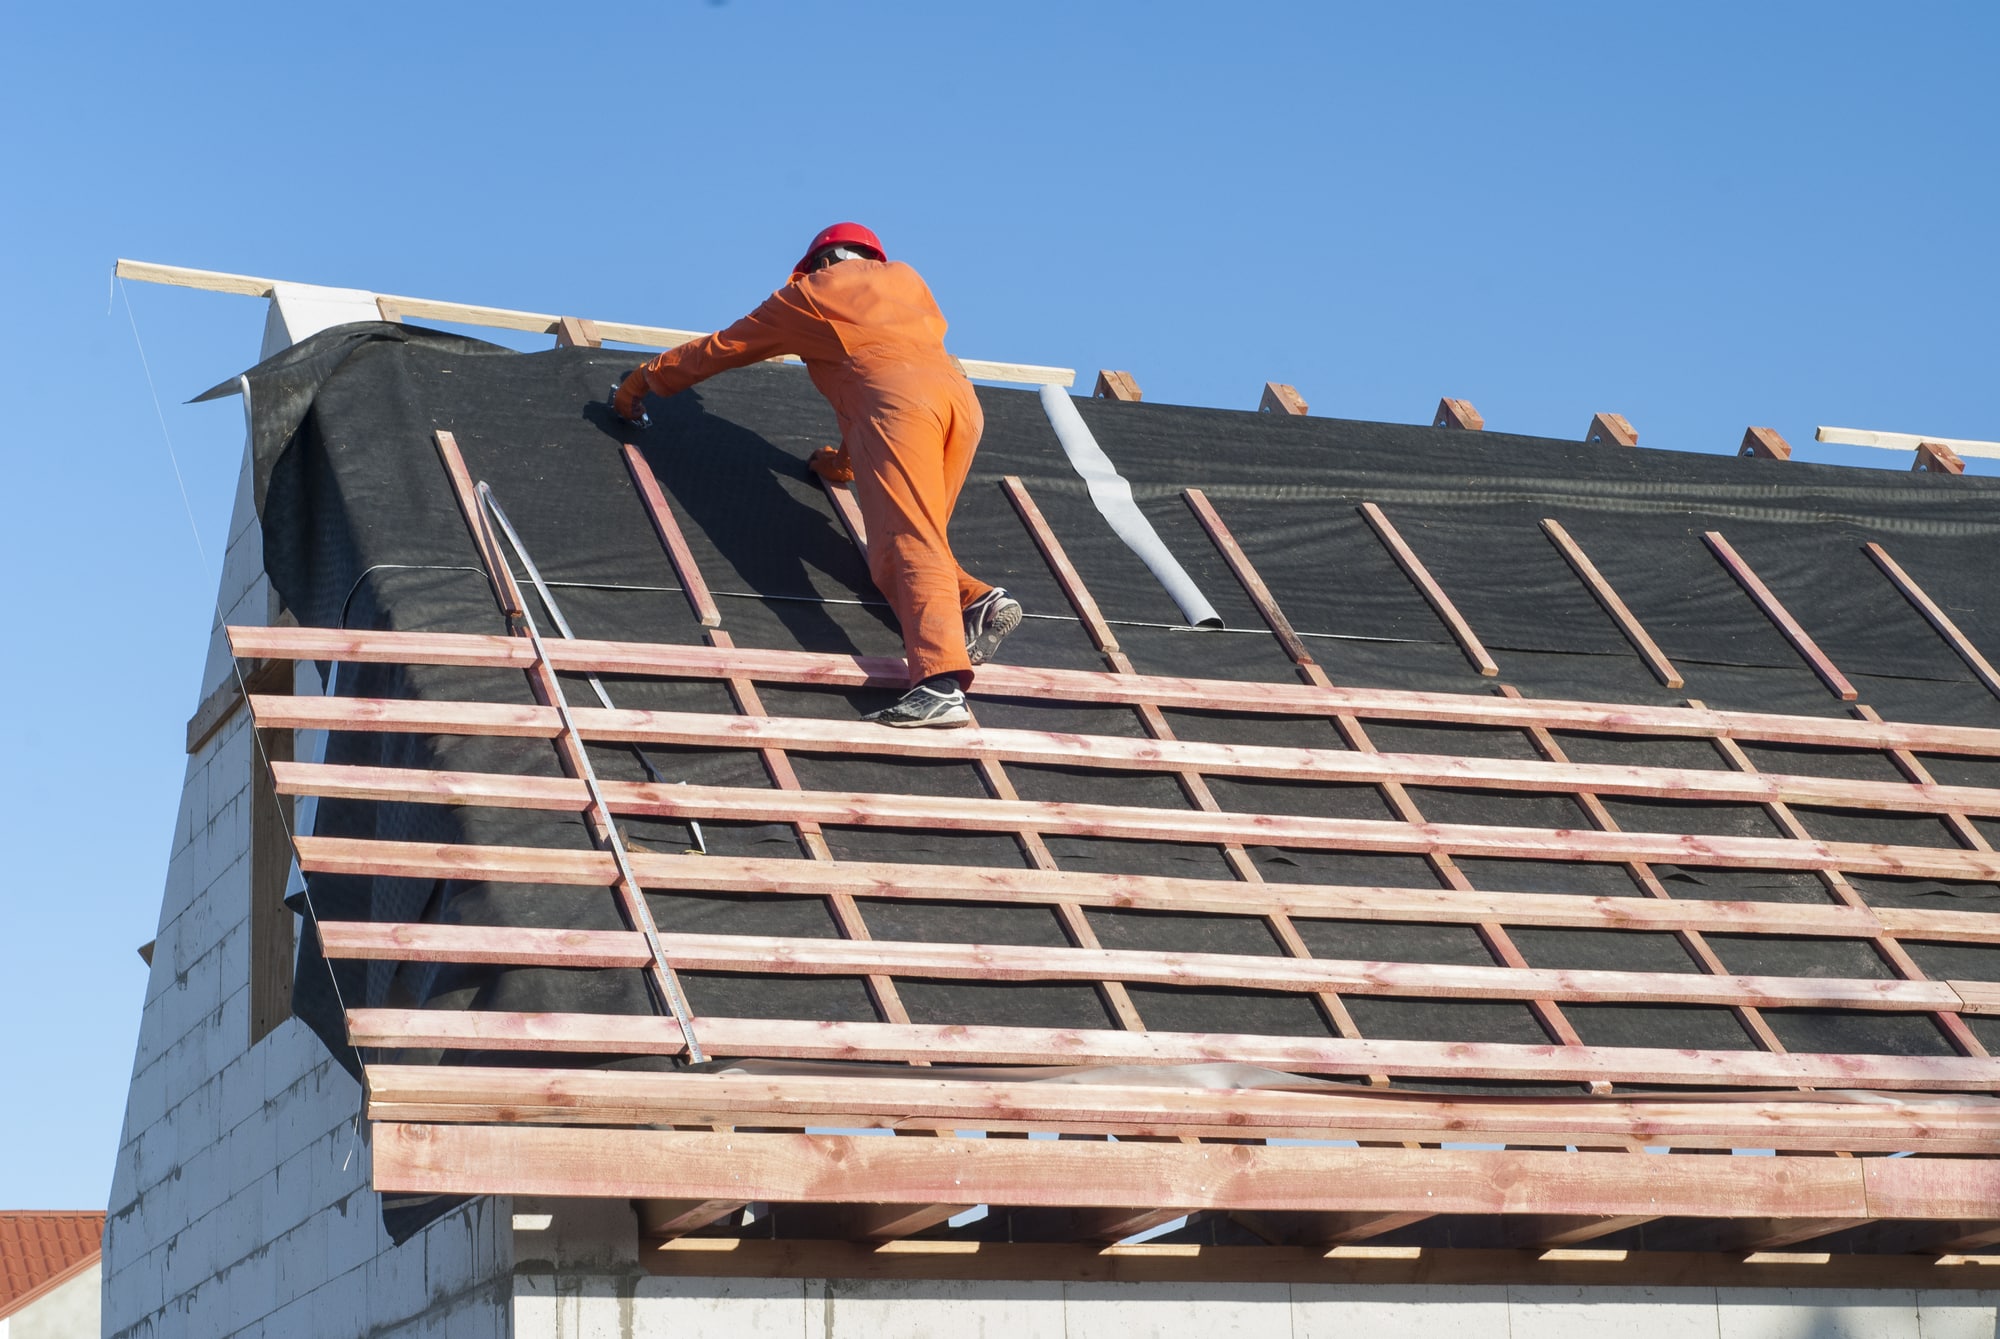 How Do I Find the Best Roofing Company?